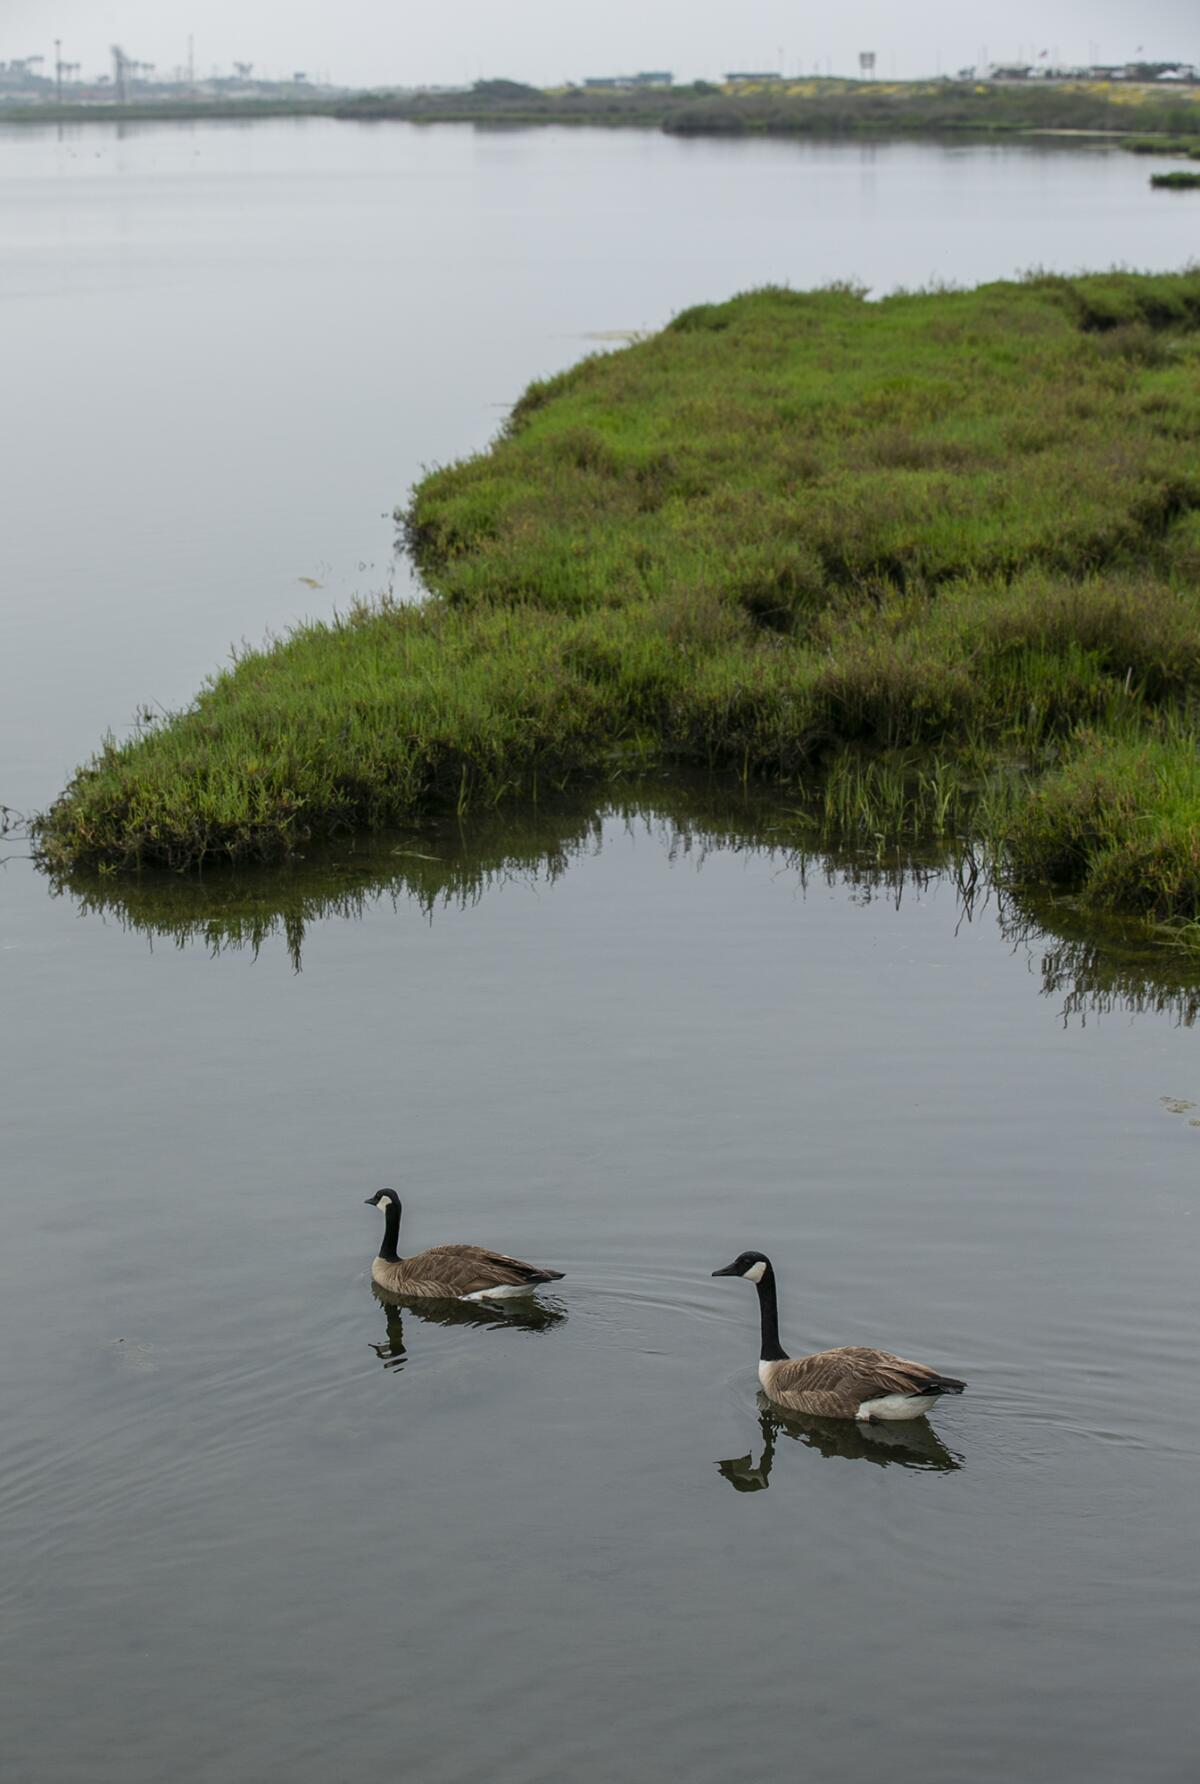 Two geese float in the water at Bolsa Chica Ecological Reserve on Wednesday in Huntington Beach.